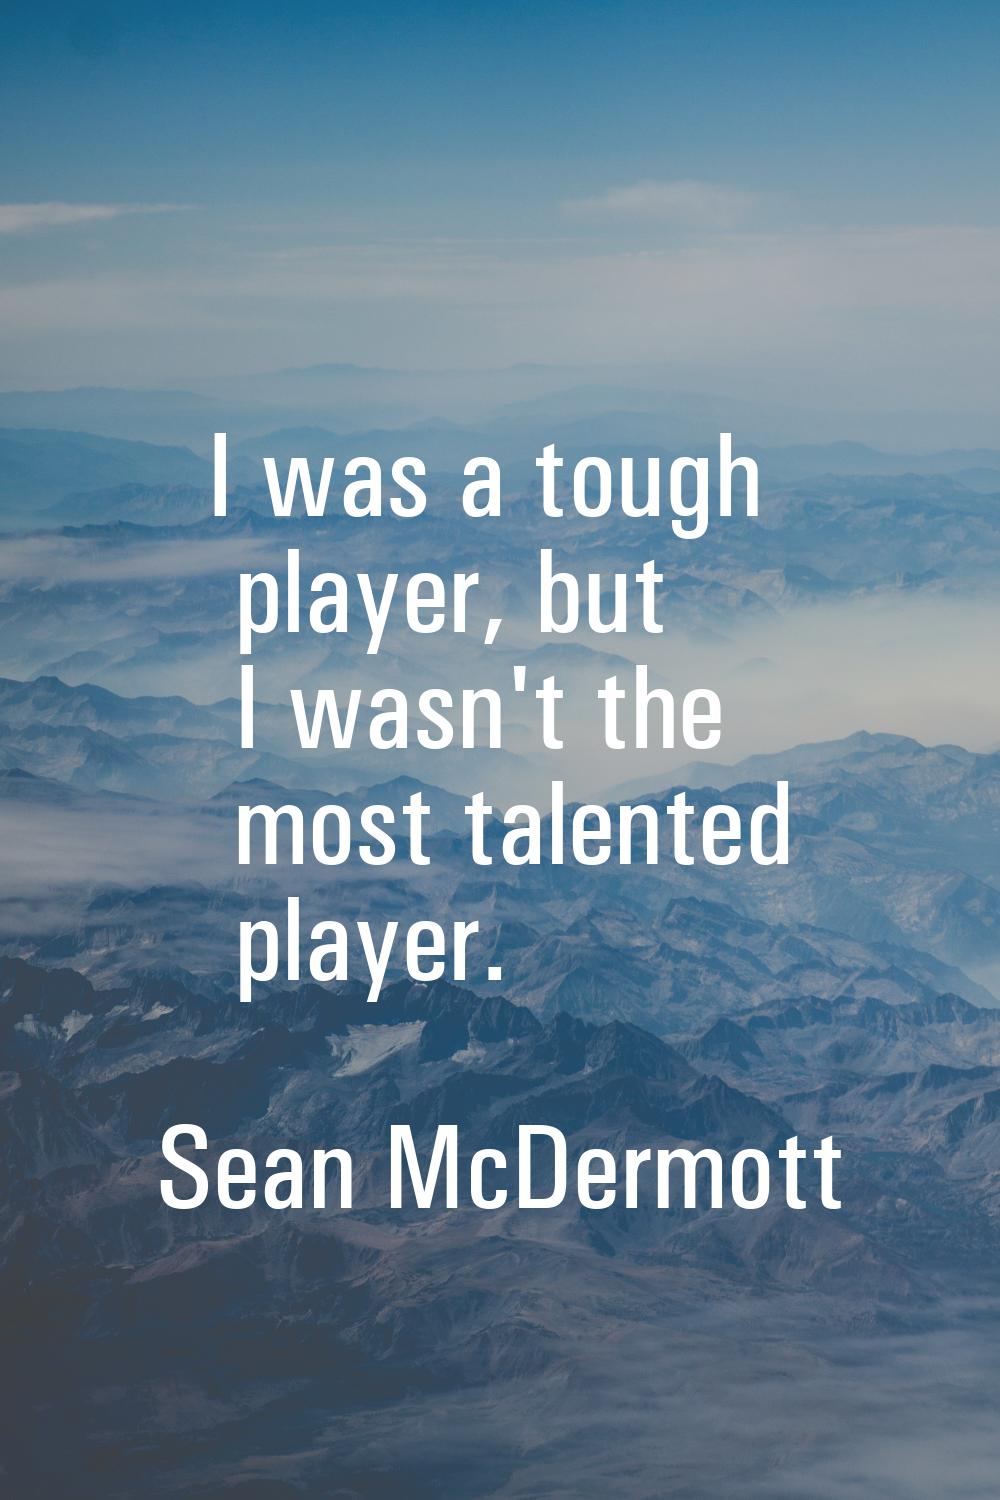 I was a tough player, but I wasn't the most talented player.